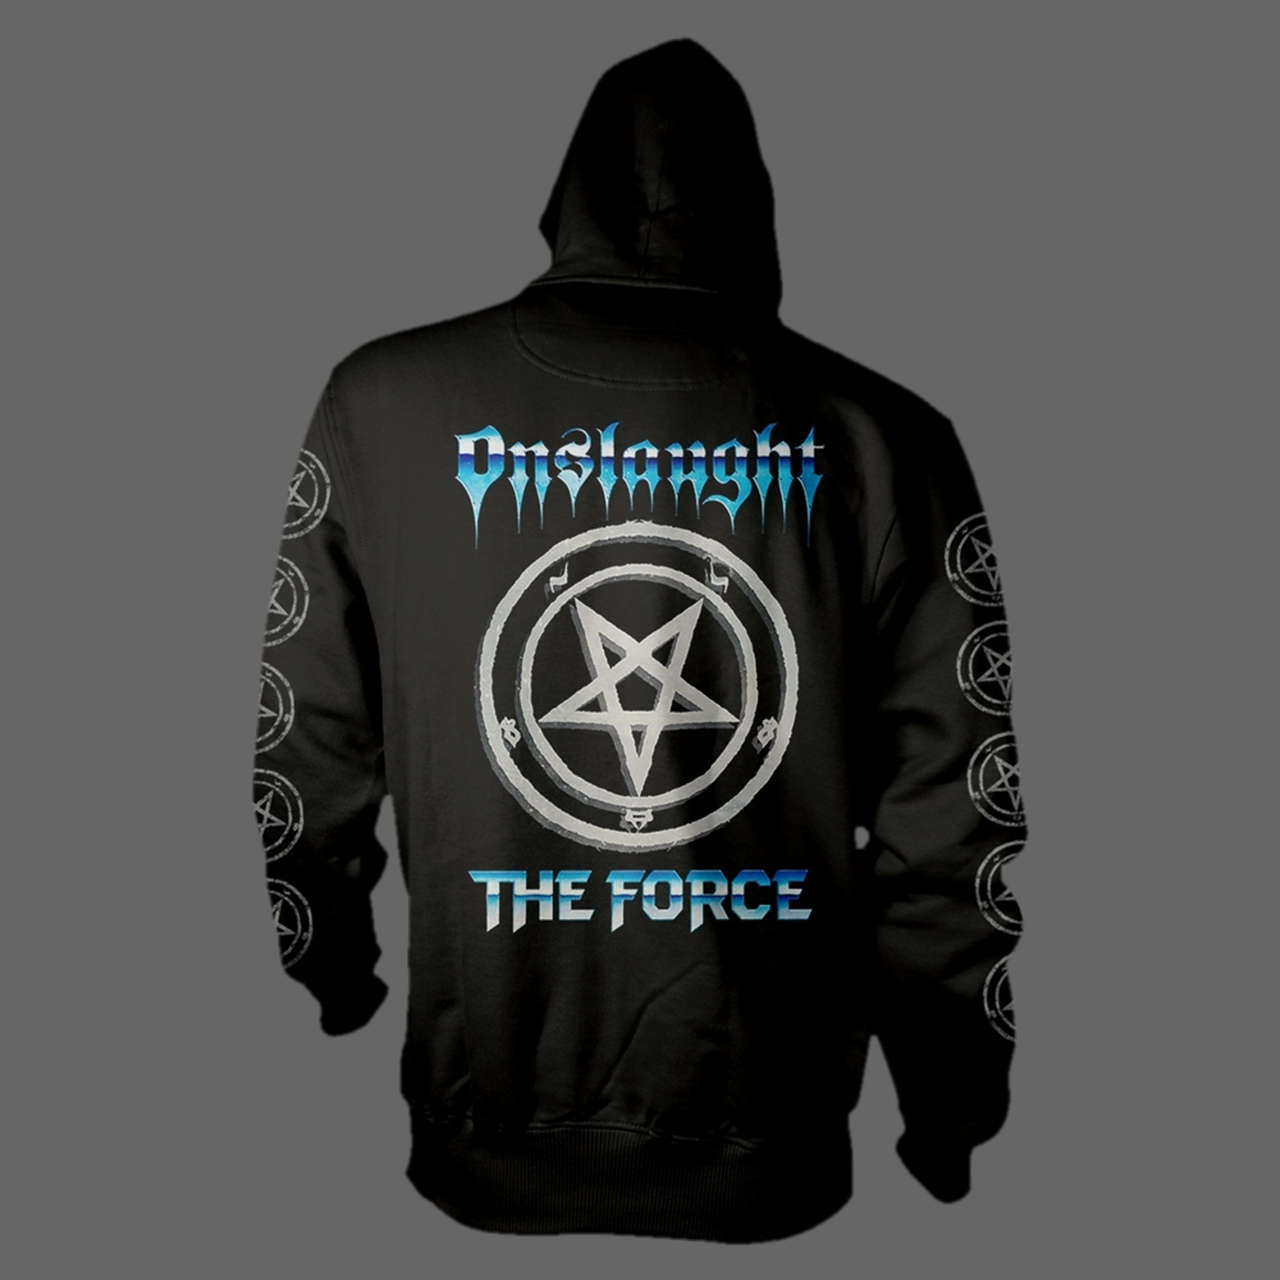 Onslaught - The Force (Hoodie)